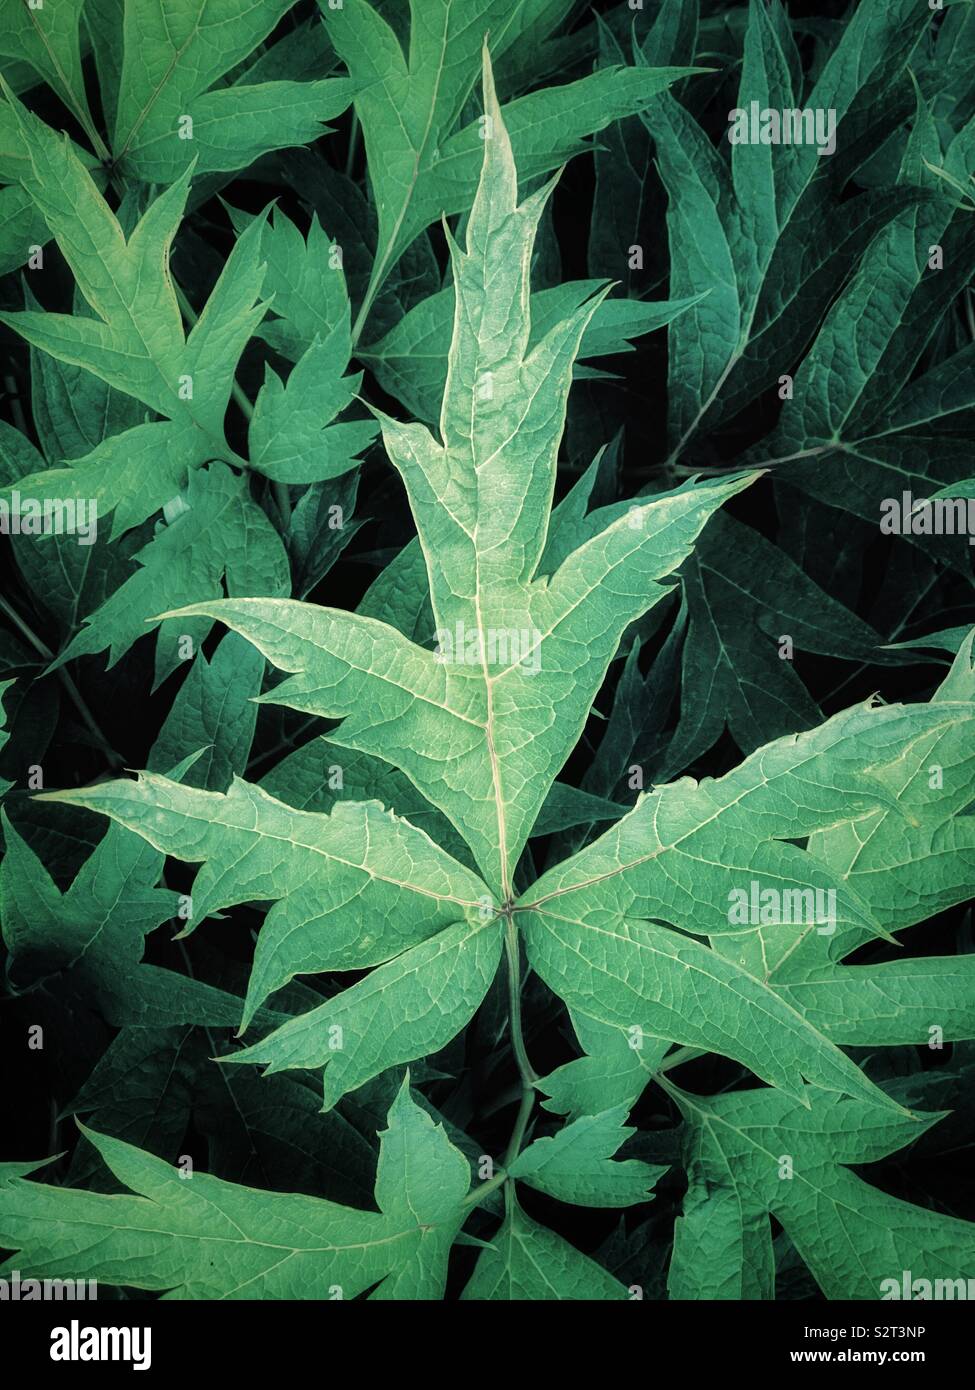 Pattern of plant leaves Stock Photo